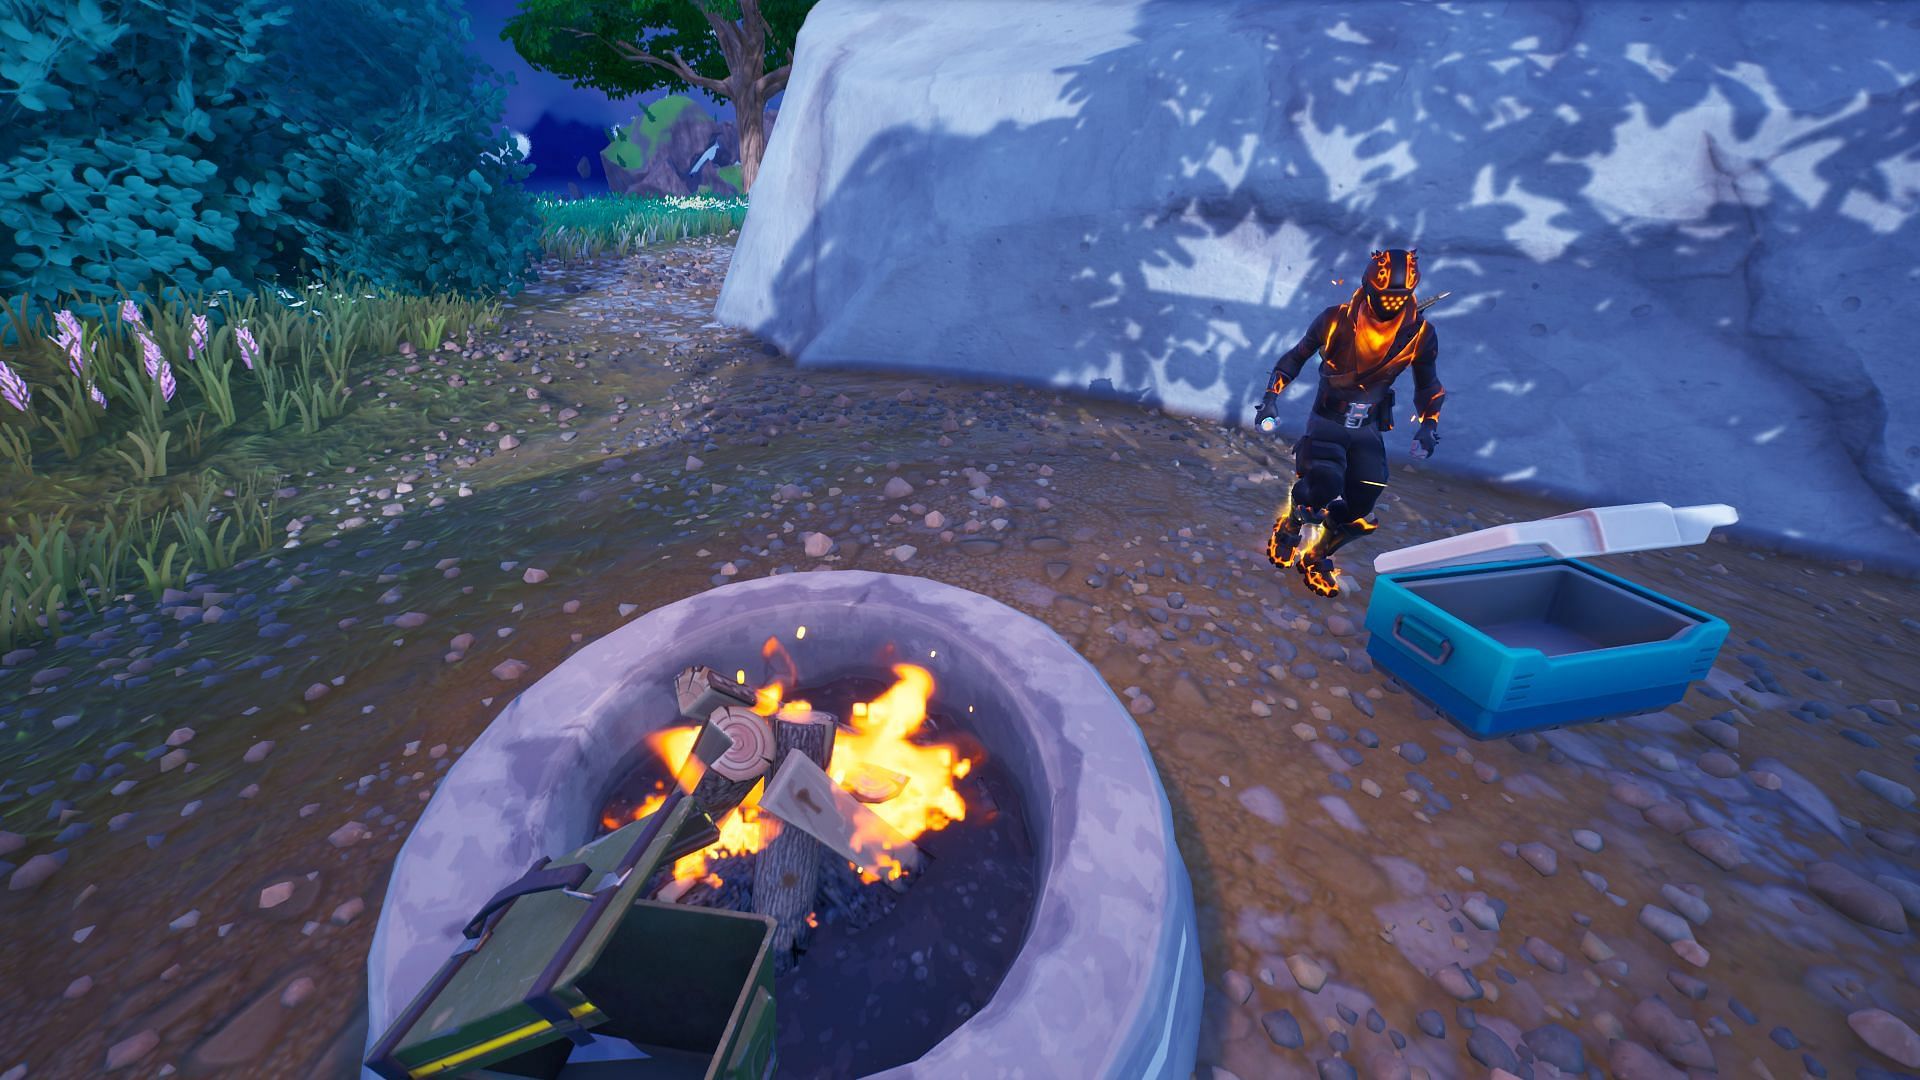 Once the Campfire is lit, take care not to extinguish it (Image via Epic Games/Fortnite)